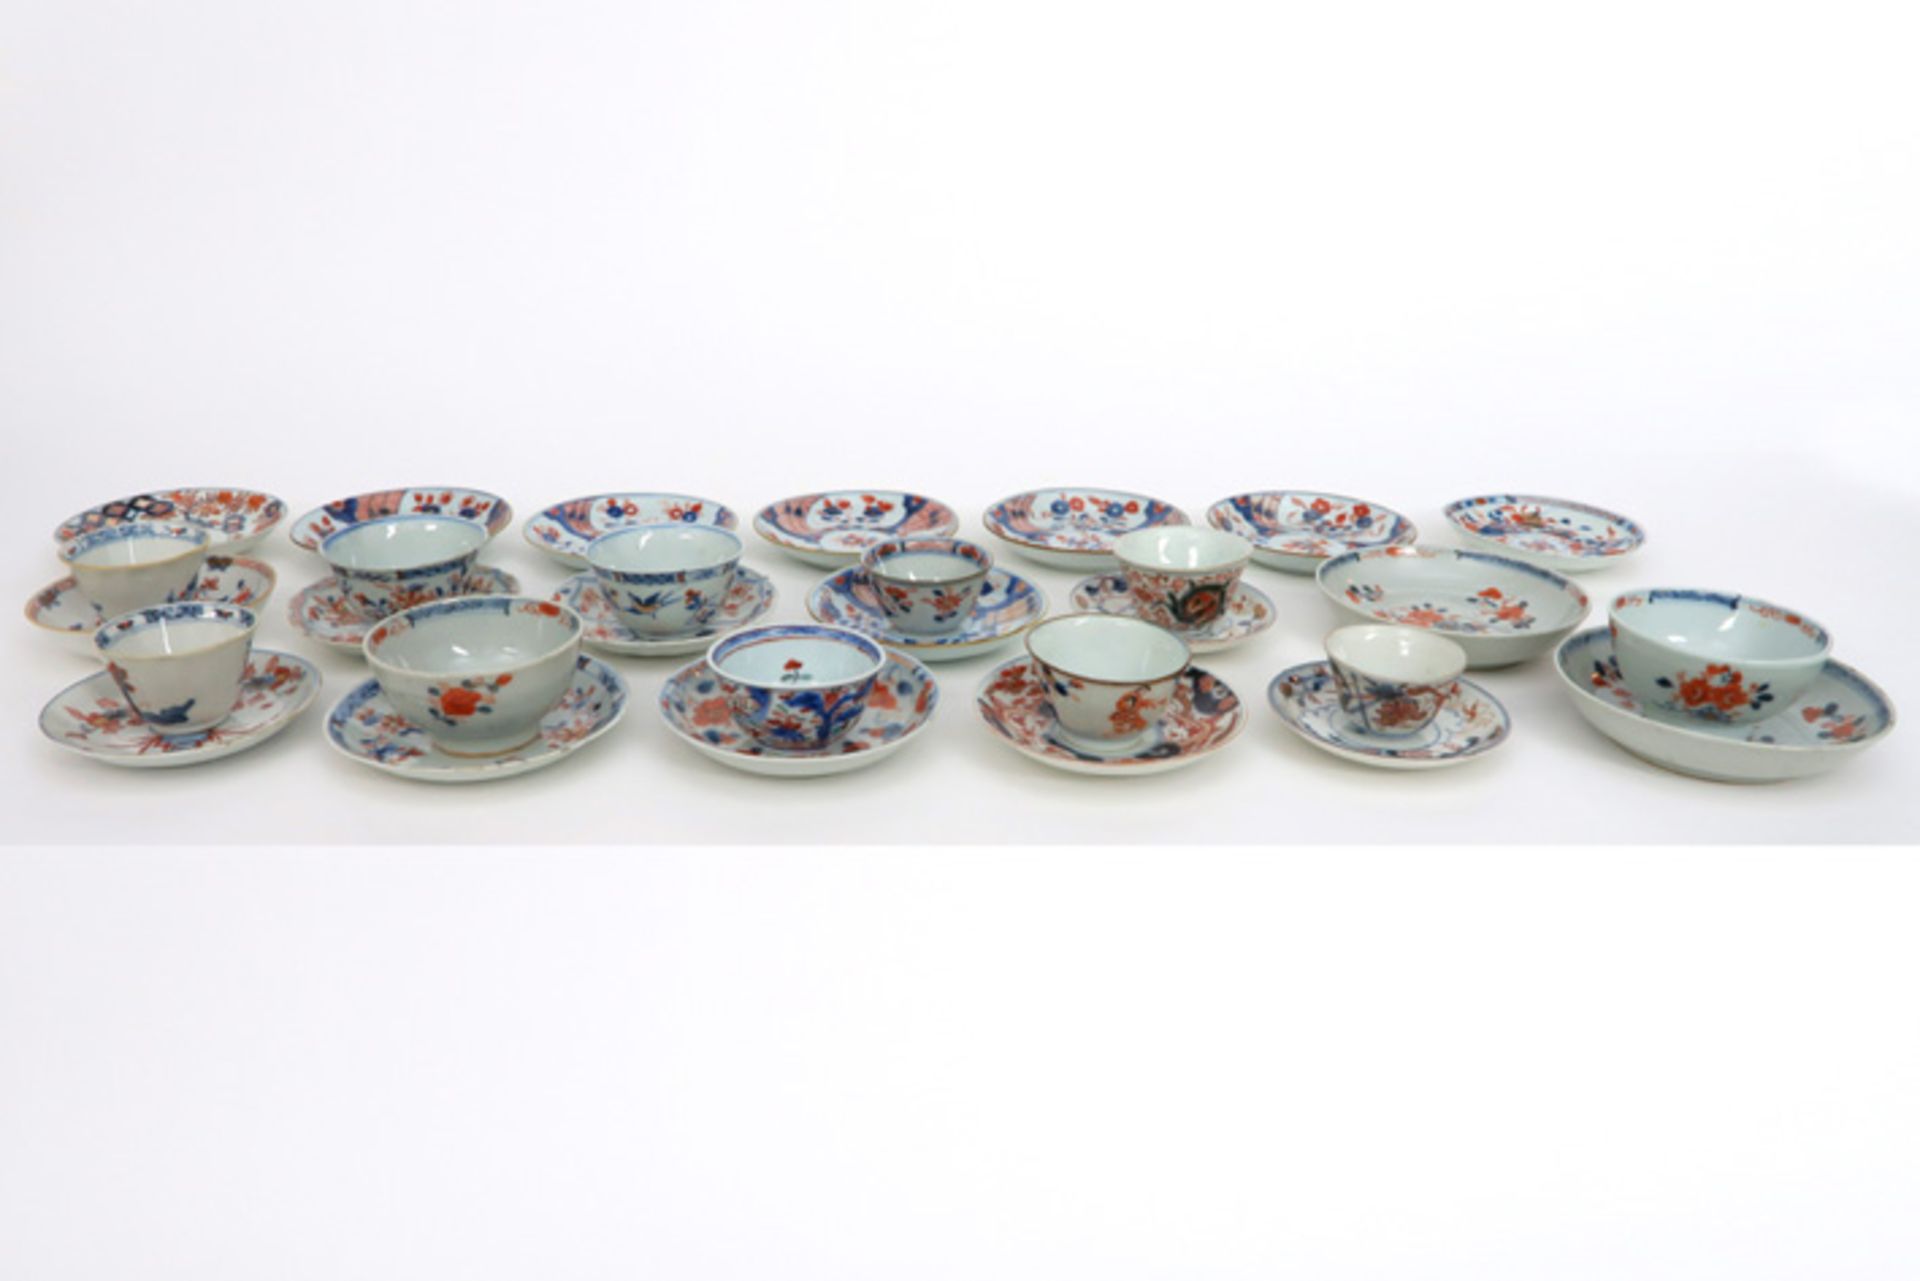 30 cups and saucers in 18th Cent. Chinese porcelain with Imari decor || Lot van 30 tasjes en